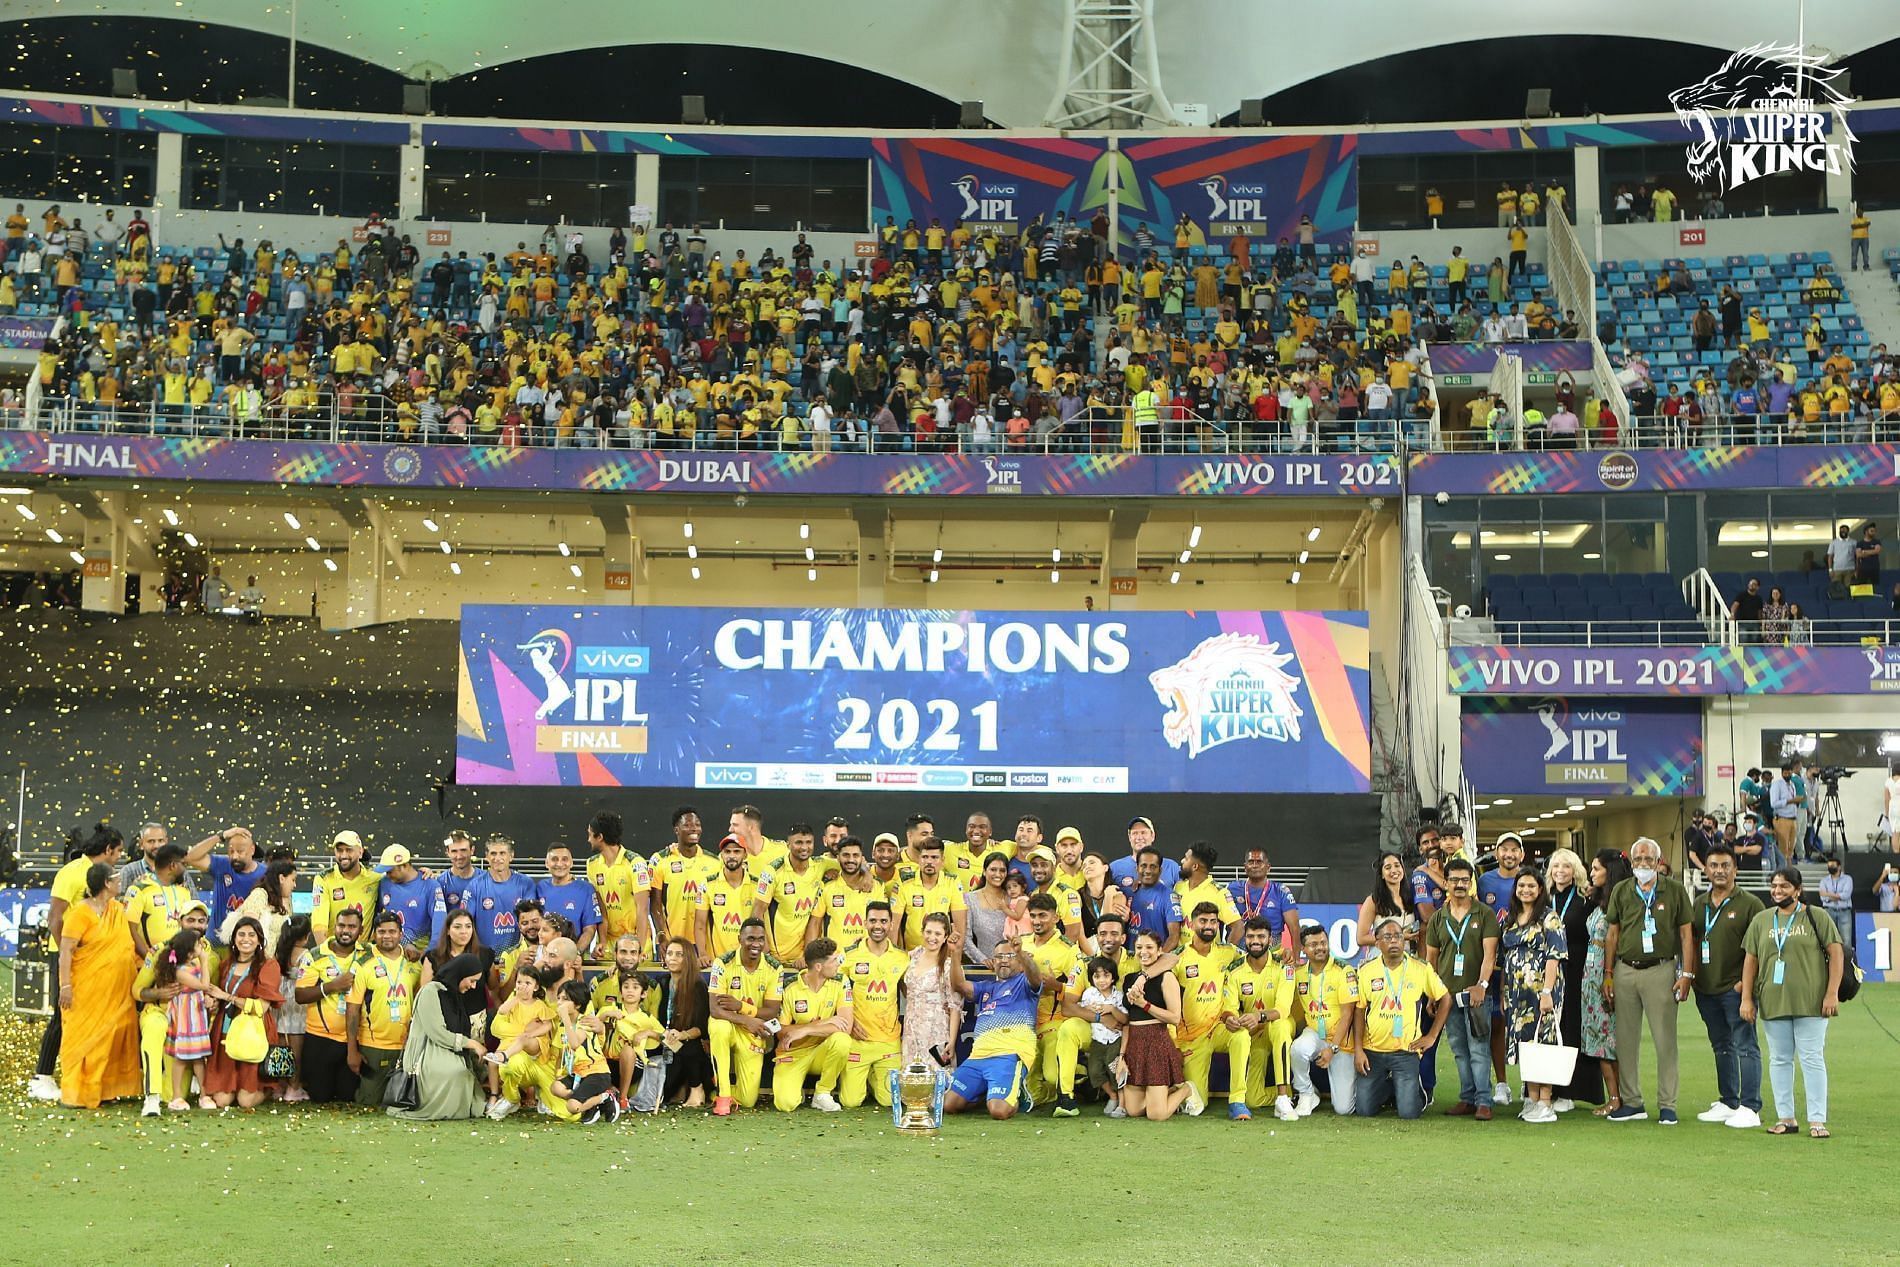  The Chennai Super Kings are the defending champions